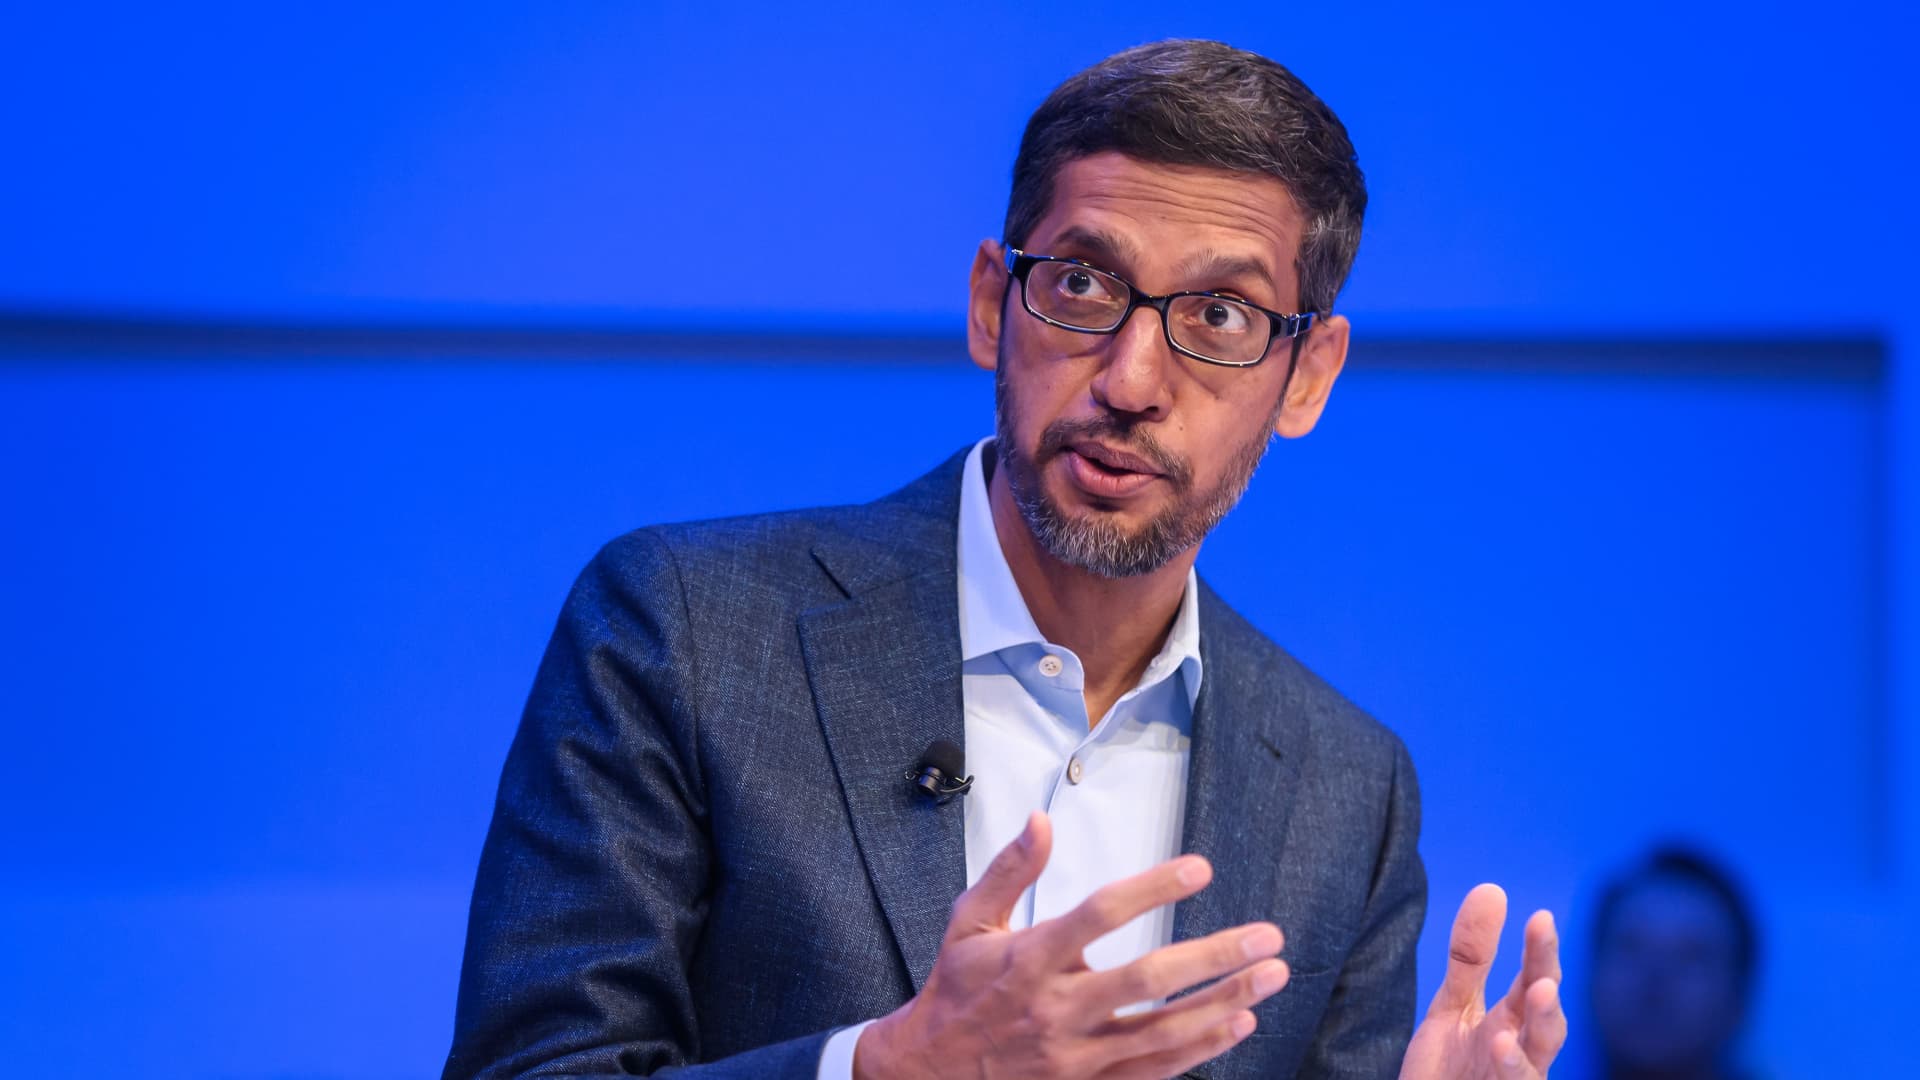 Google CEO says he hopes to make company ‘20% more’ efficient, hints at potential cuts